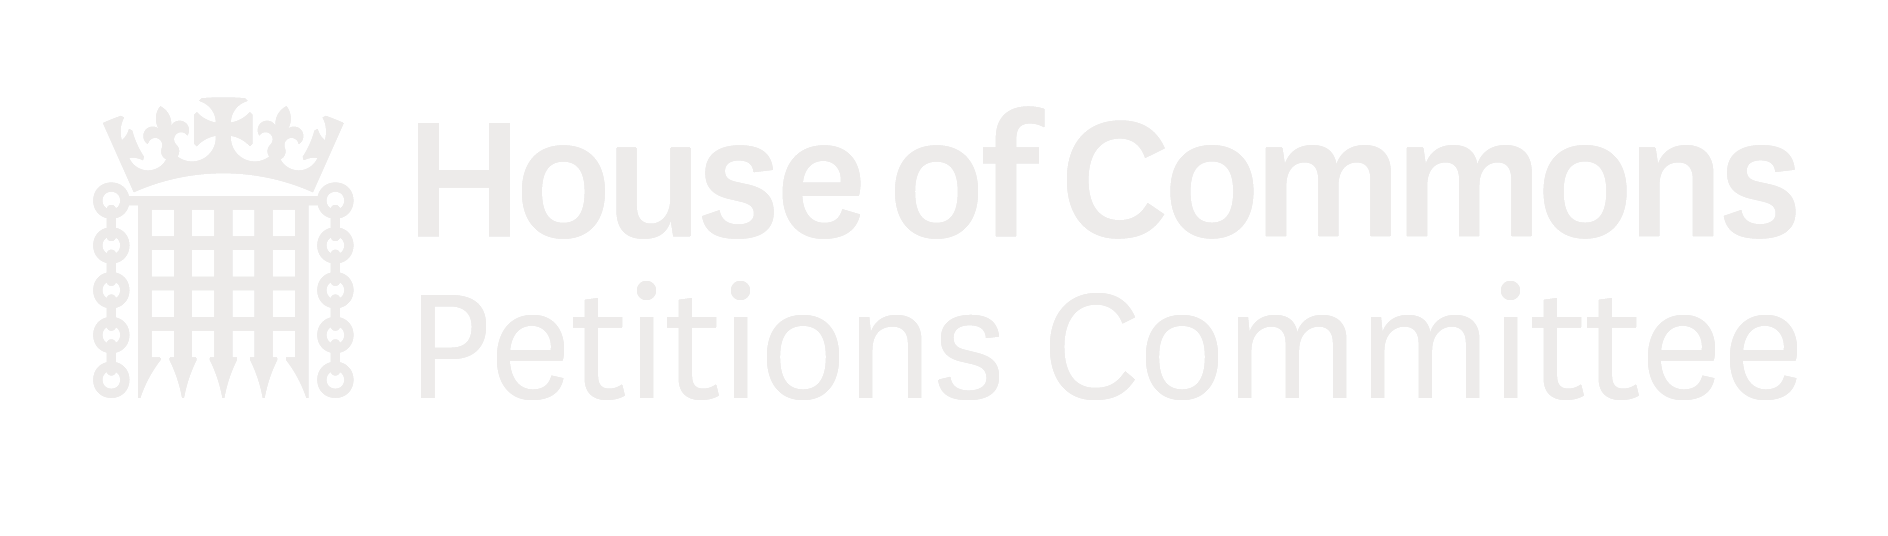 House of Commons Petitions Committee logo